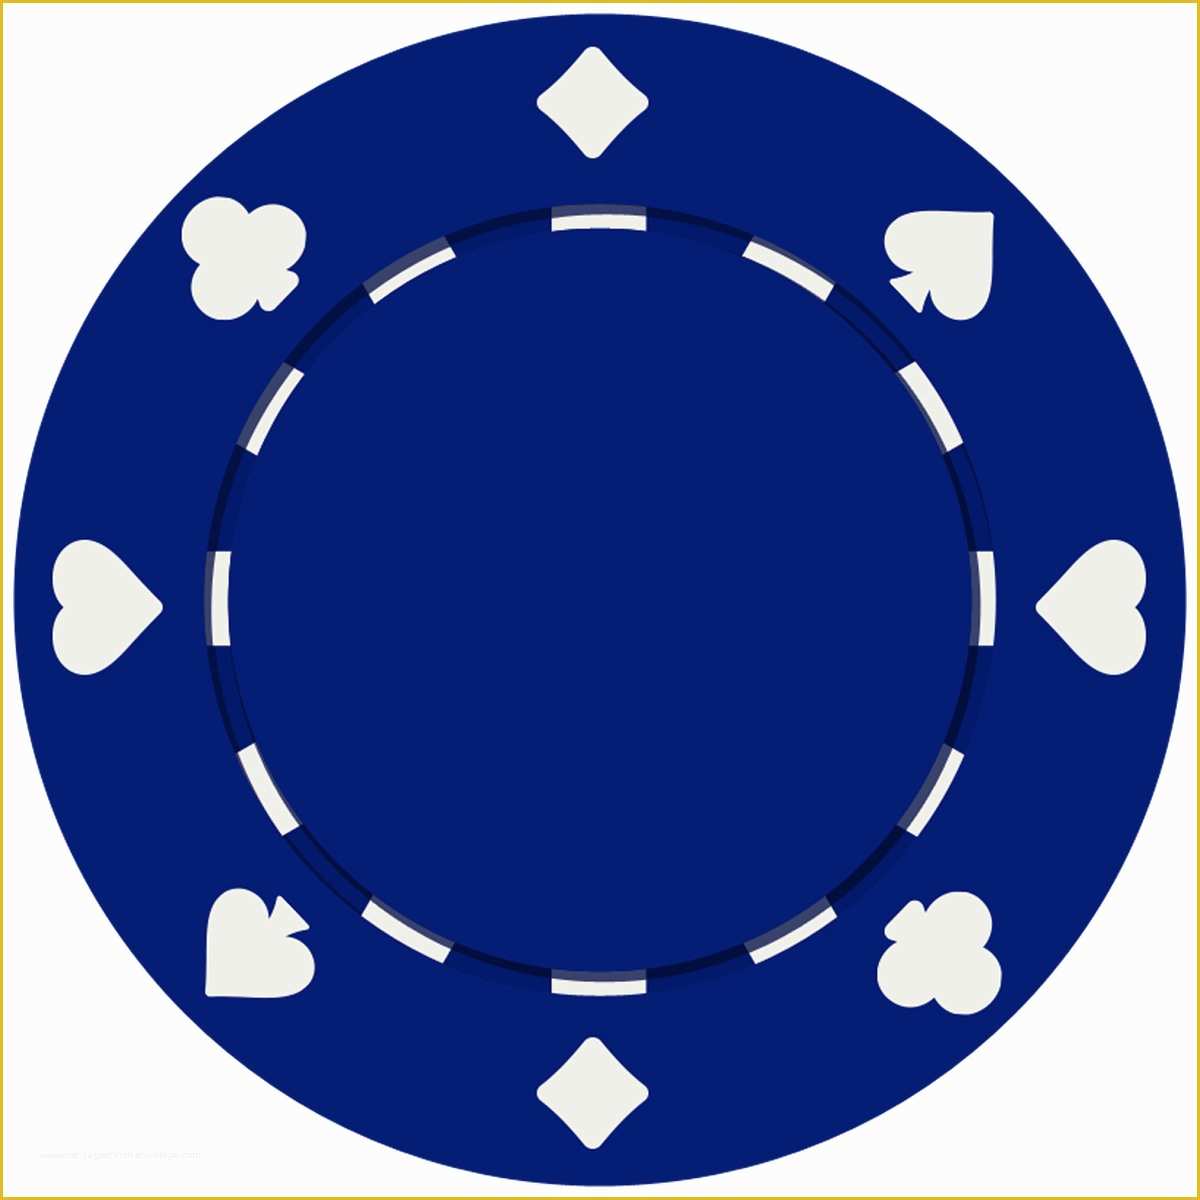 Free Poker Chip Template Of Pcs01 Suited Style Poker Chip – Beyond Manufacturing